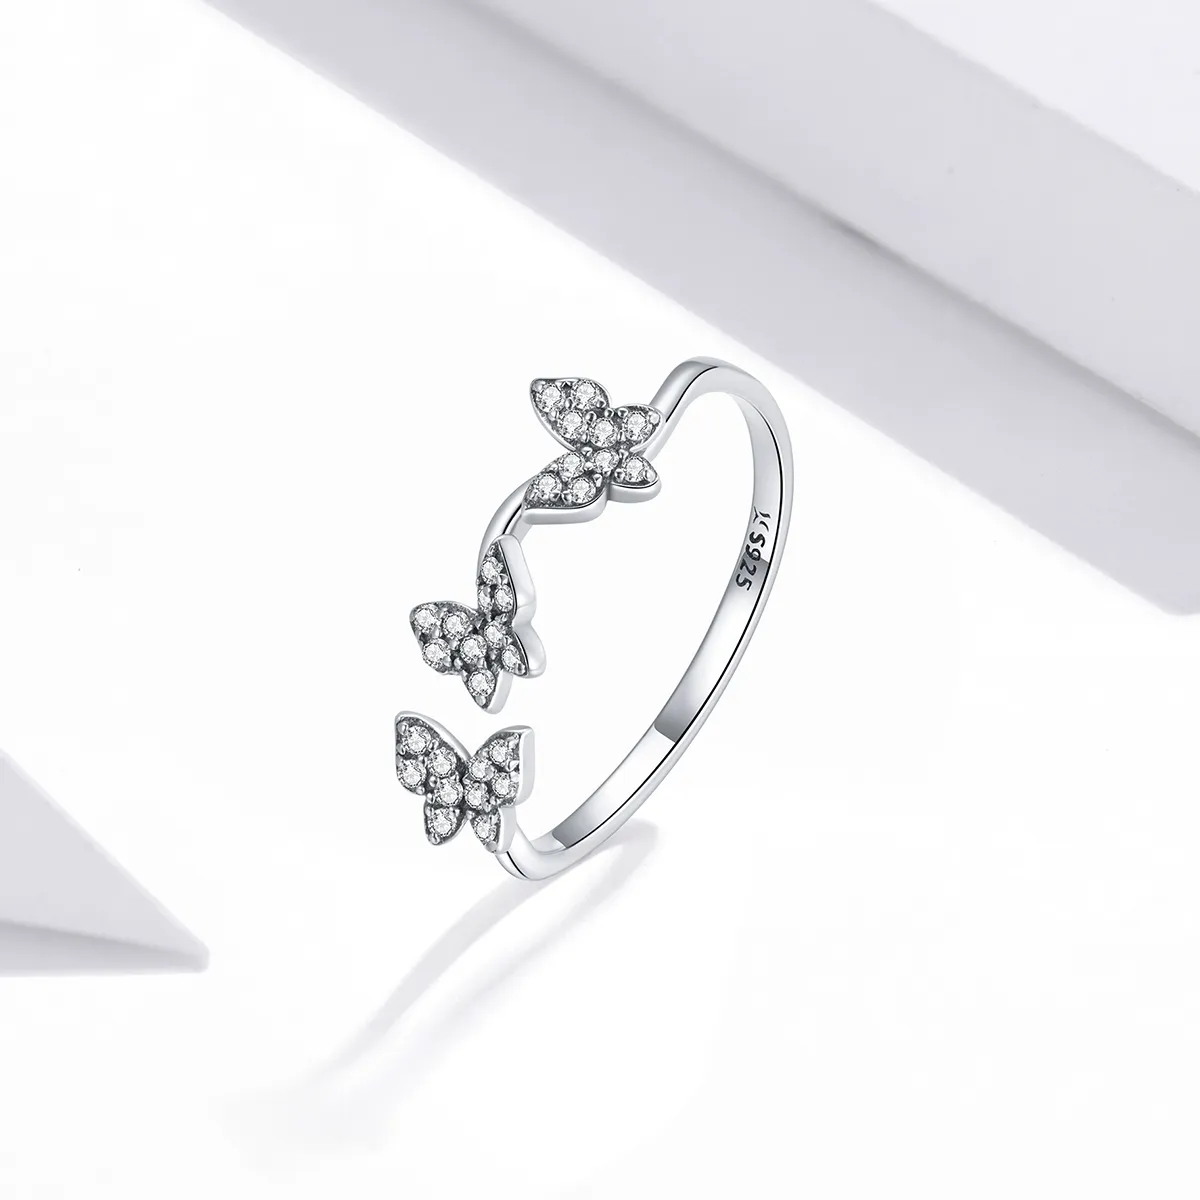 Pandora Style Silver Butterfly Open Ring - SCR704